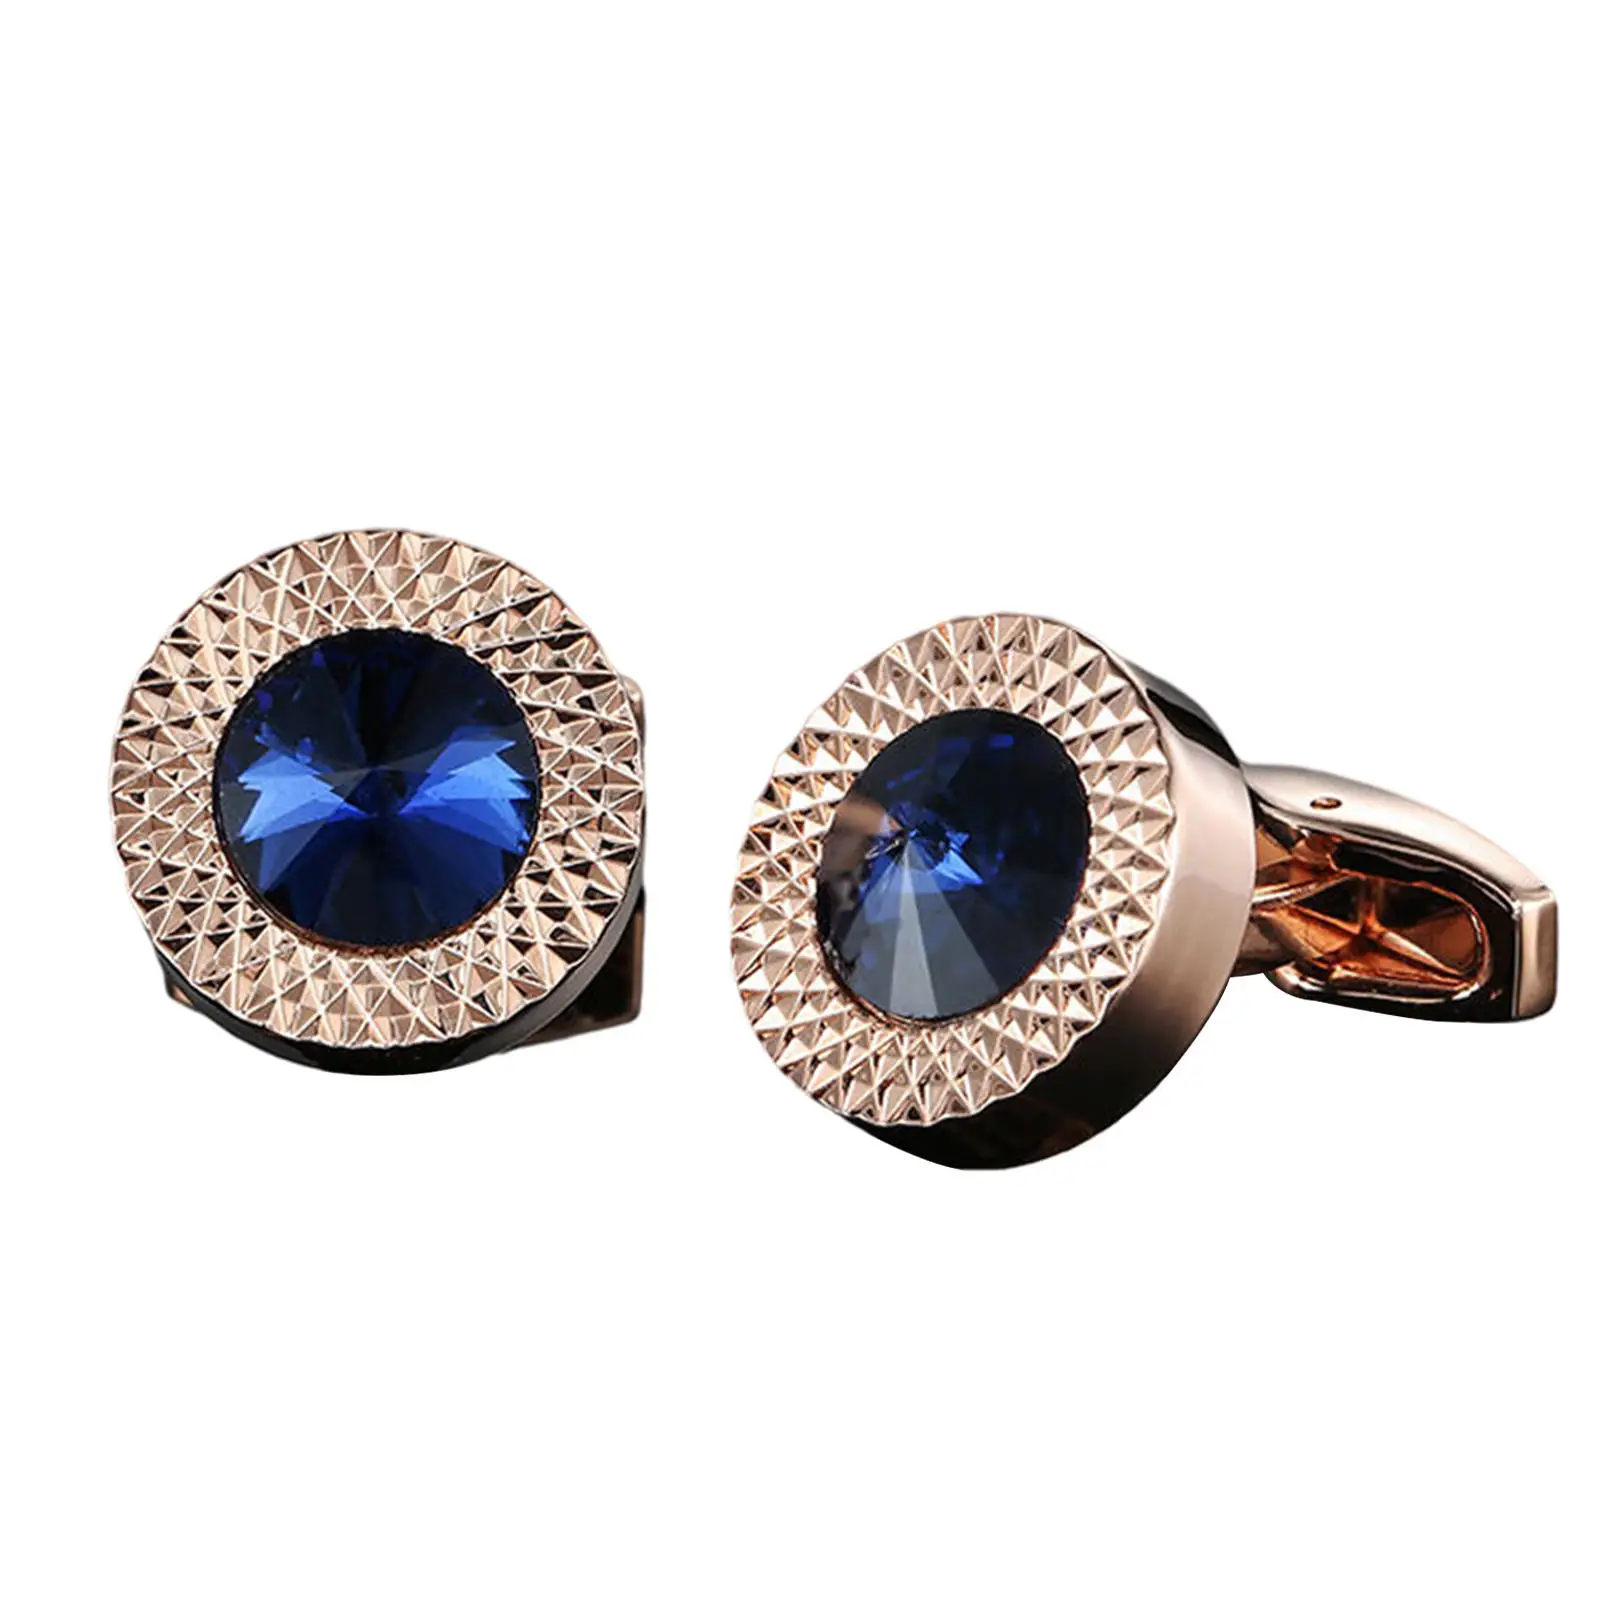 Mens Round Copper Crystal Shirts Cufflinks , Applies to Any Occasion Business Wedding Present for Families and Friends Shiny